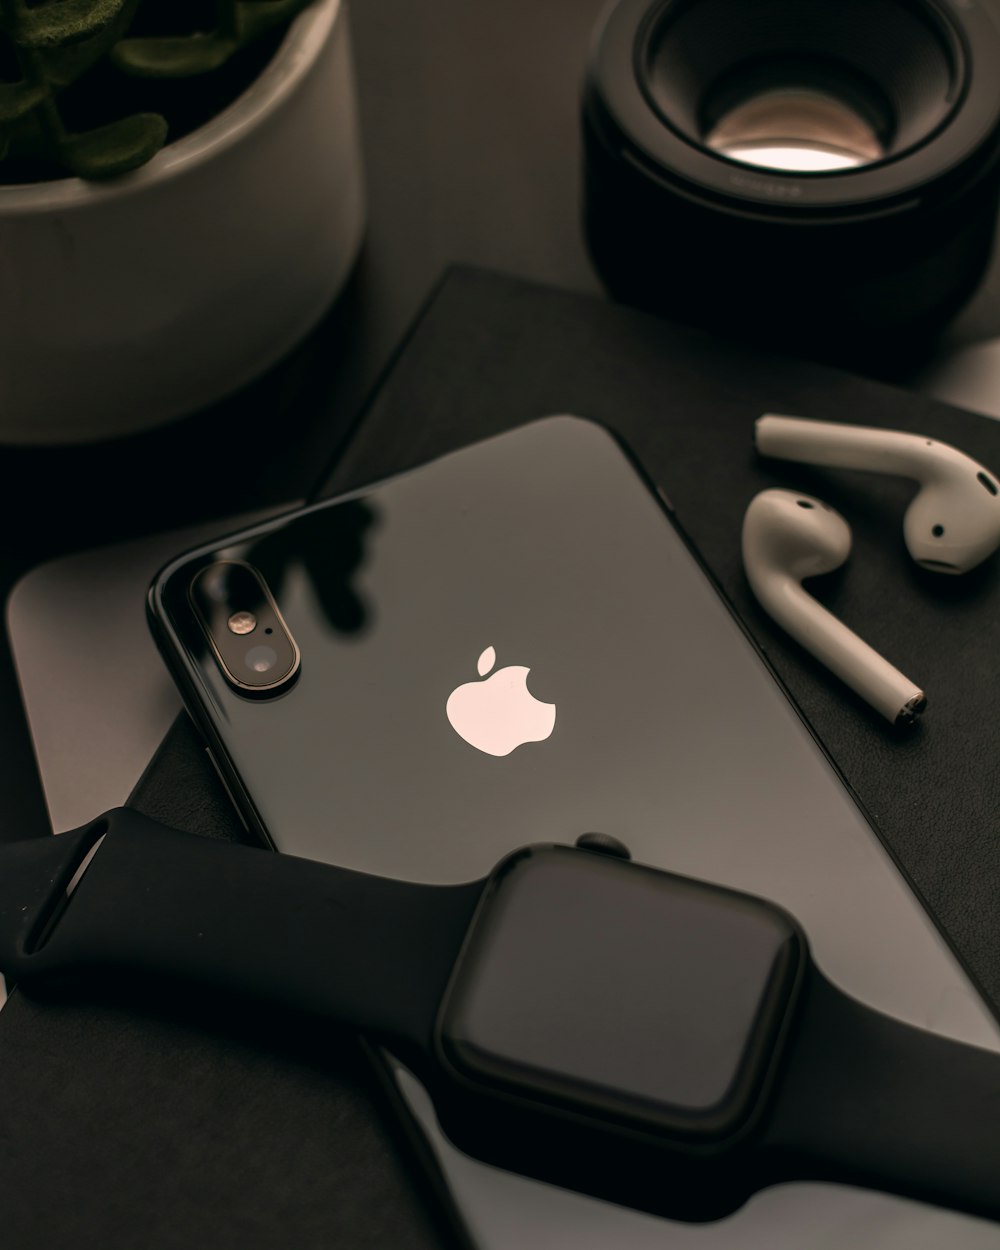 space black Apple Watch over black iPhone X